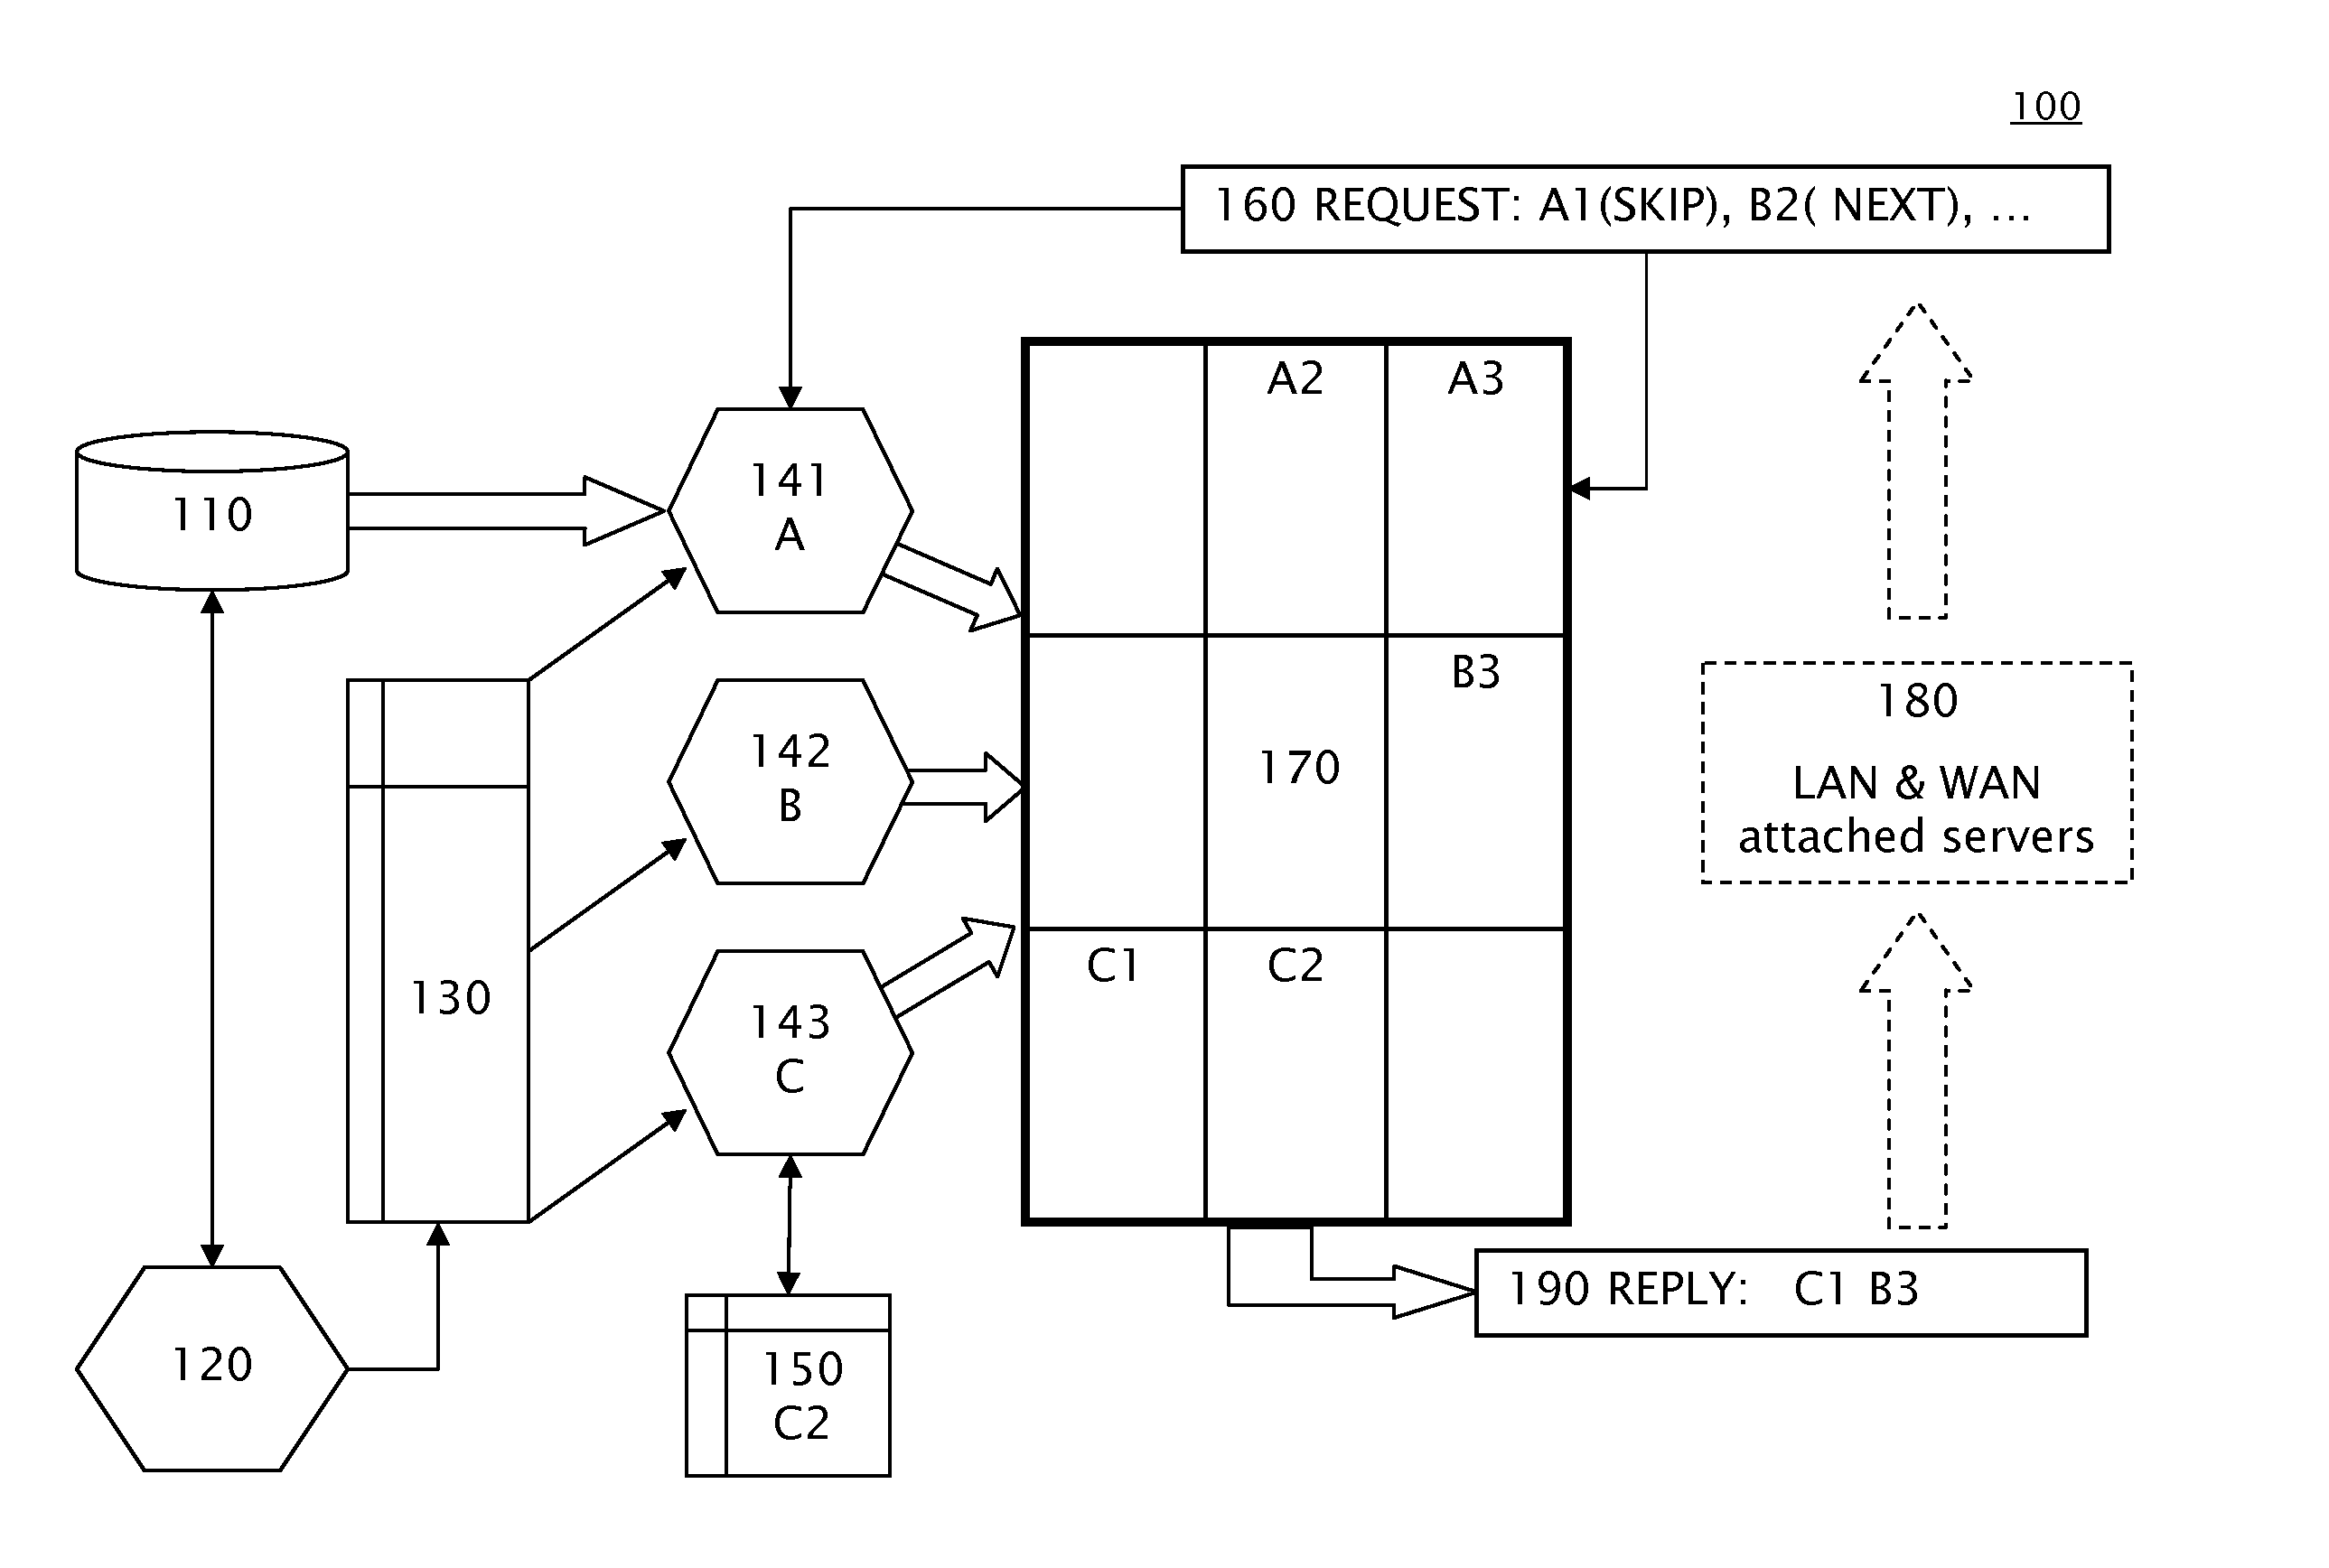 Multi-streamed method for optimizing data transfer through parallelized interlacing of data based upon sorted characteristics to minimize latencies inherent in the system